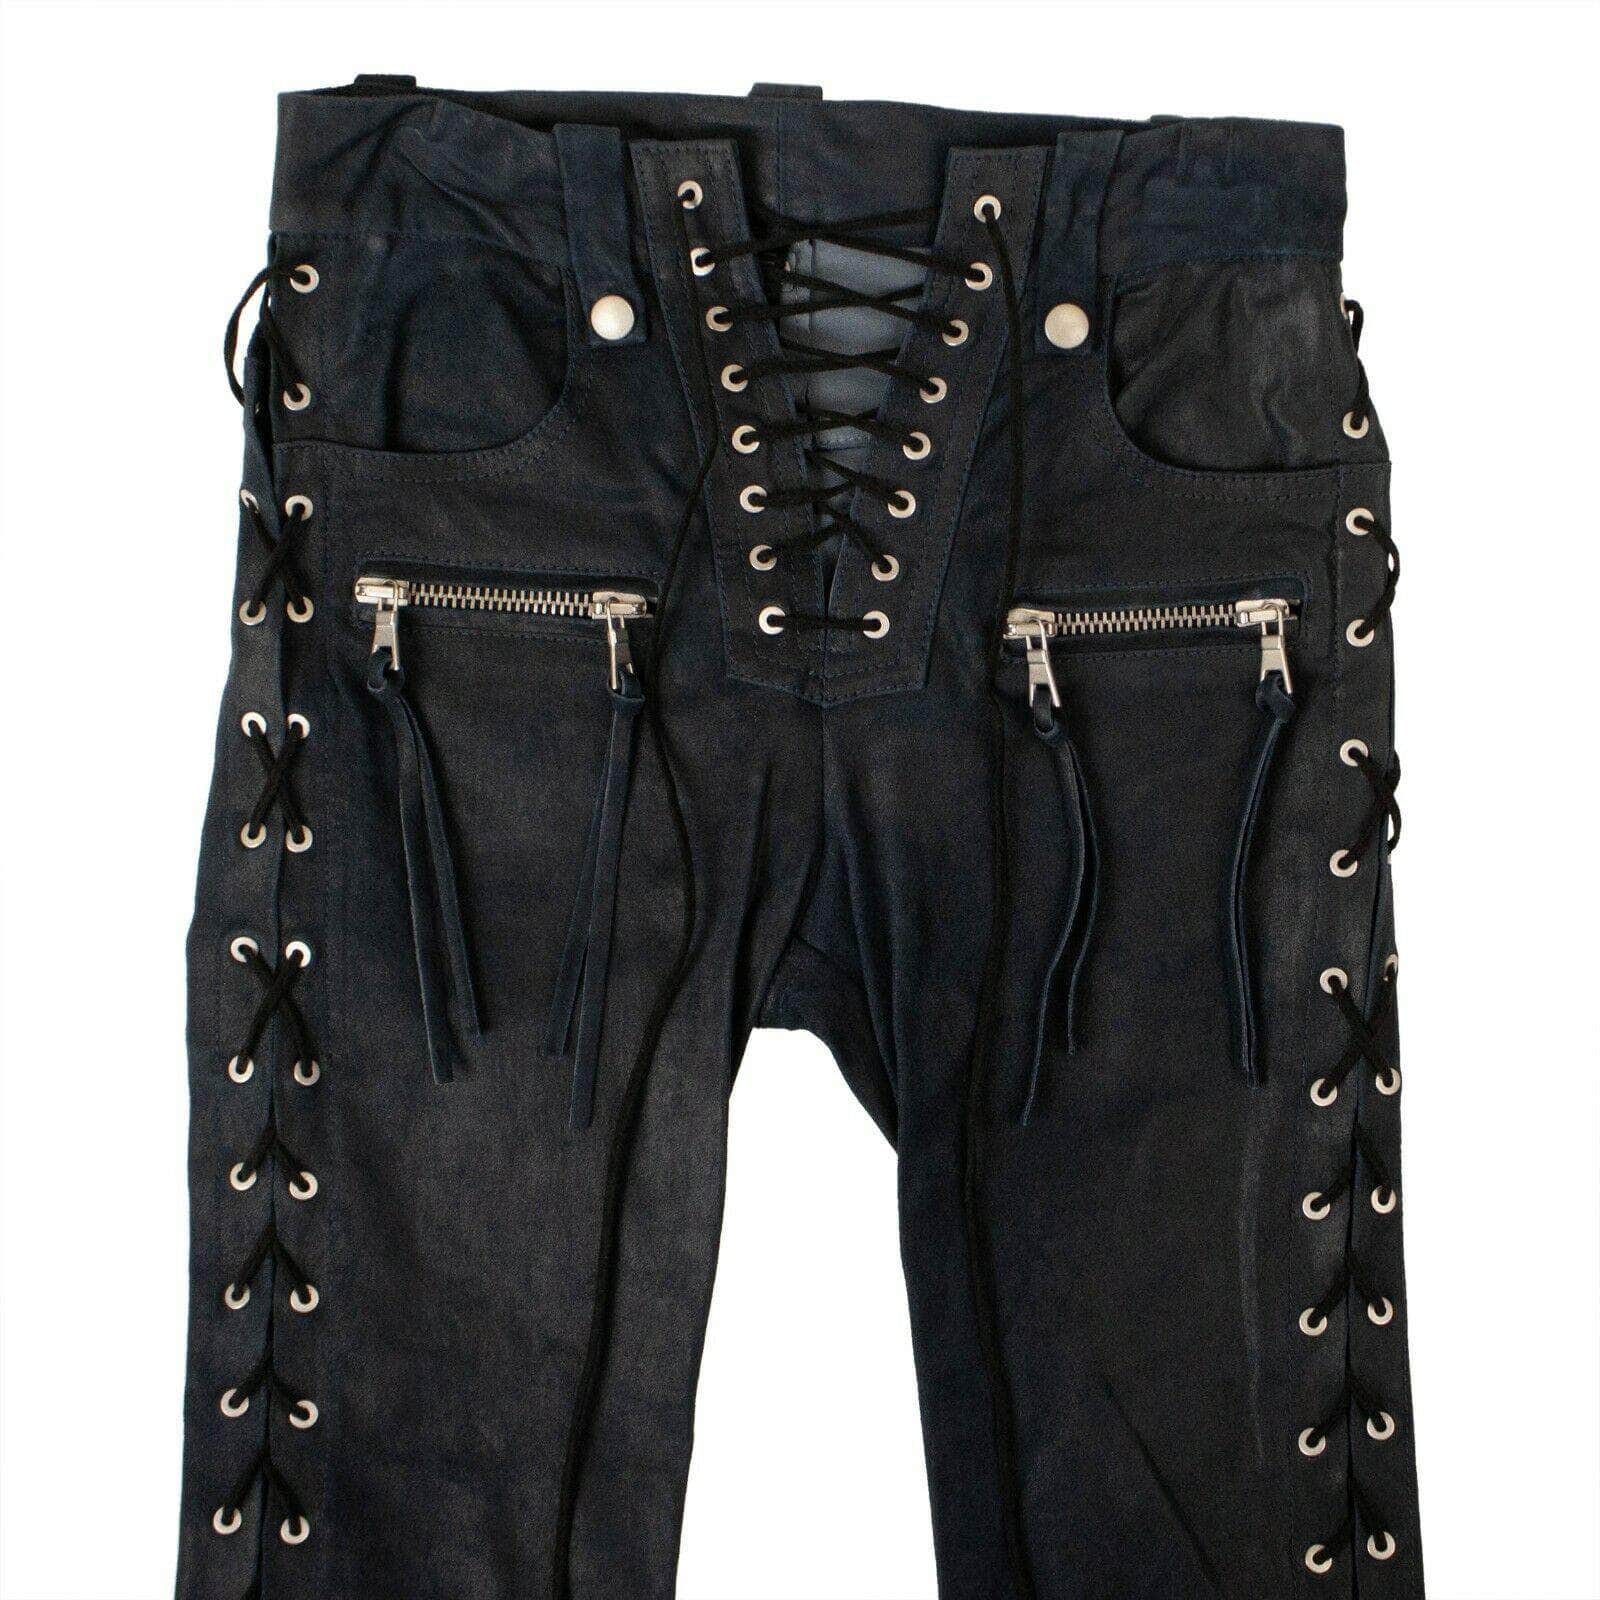 Lace Up Ambition Leather Pants | Shop Custom Made Leather Pants